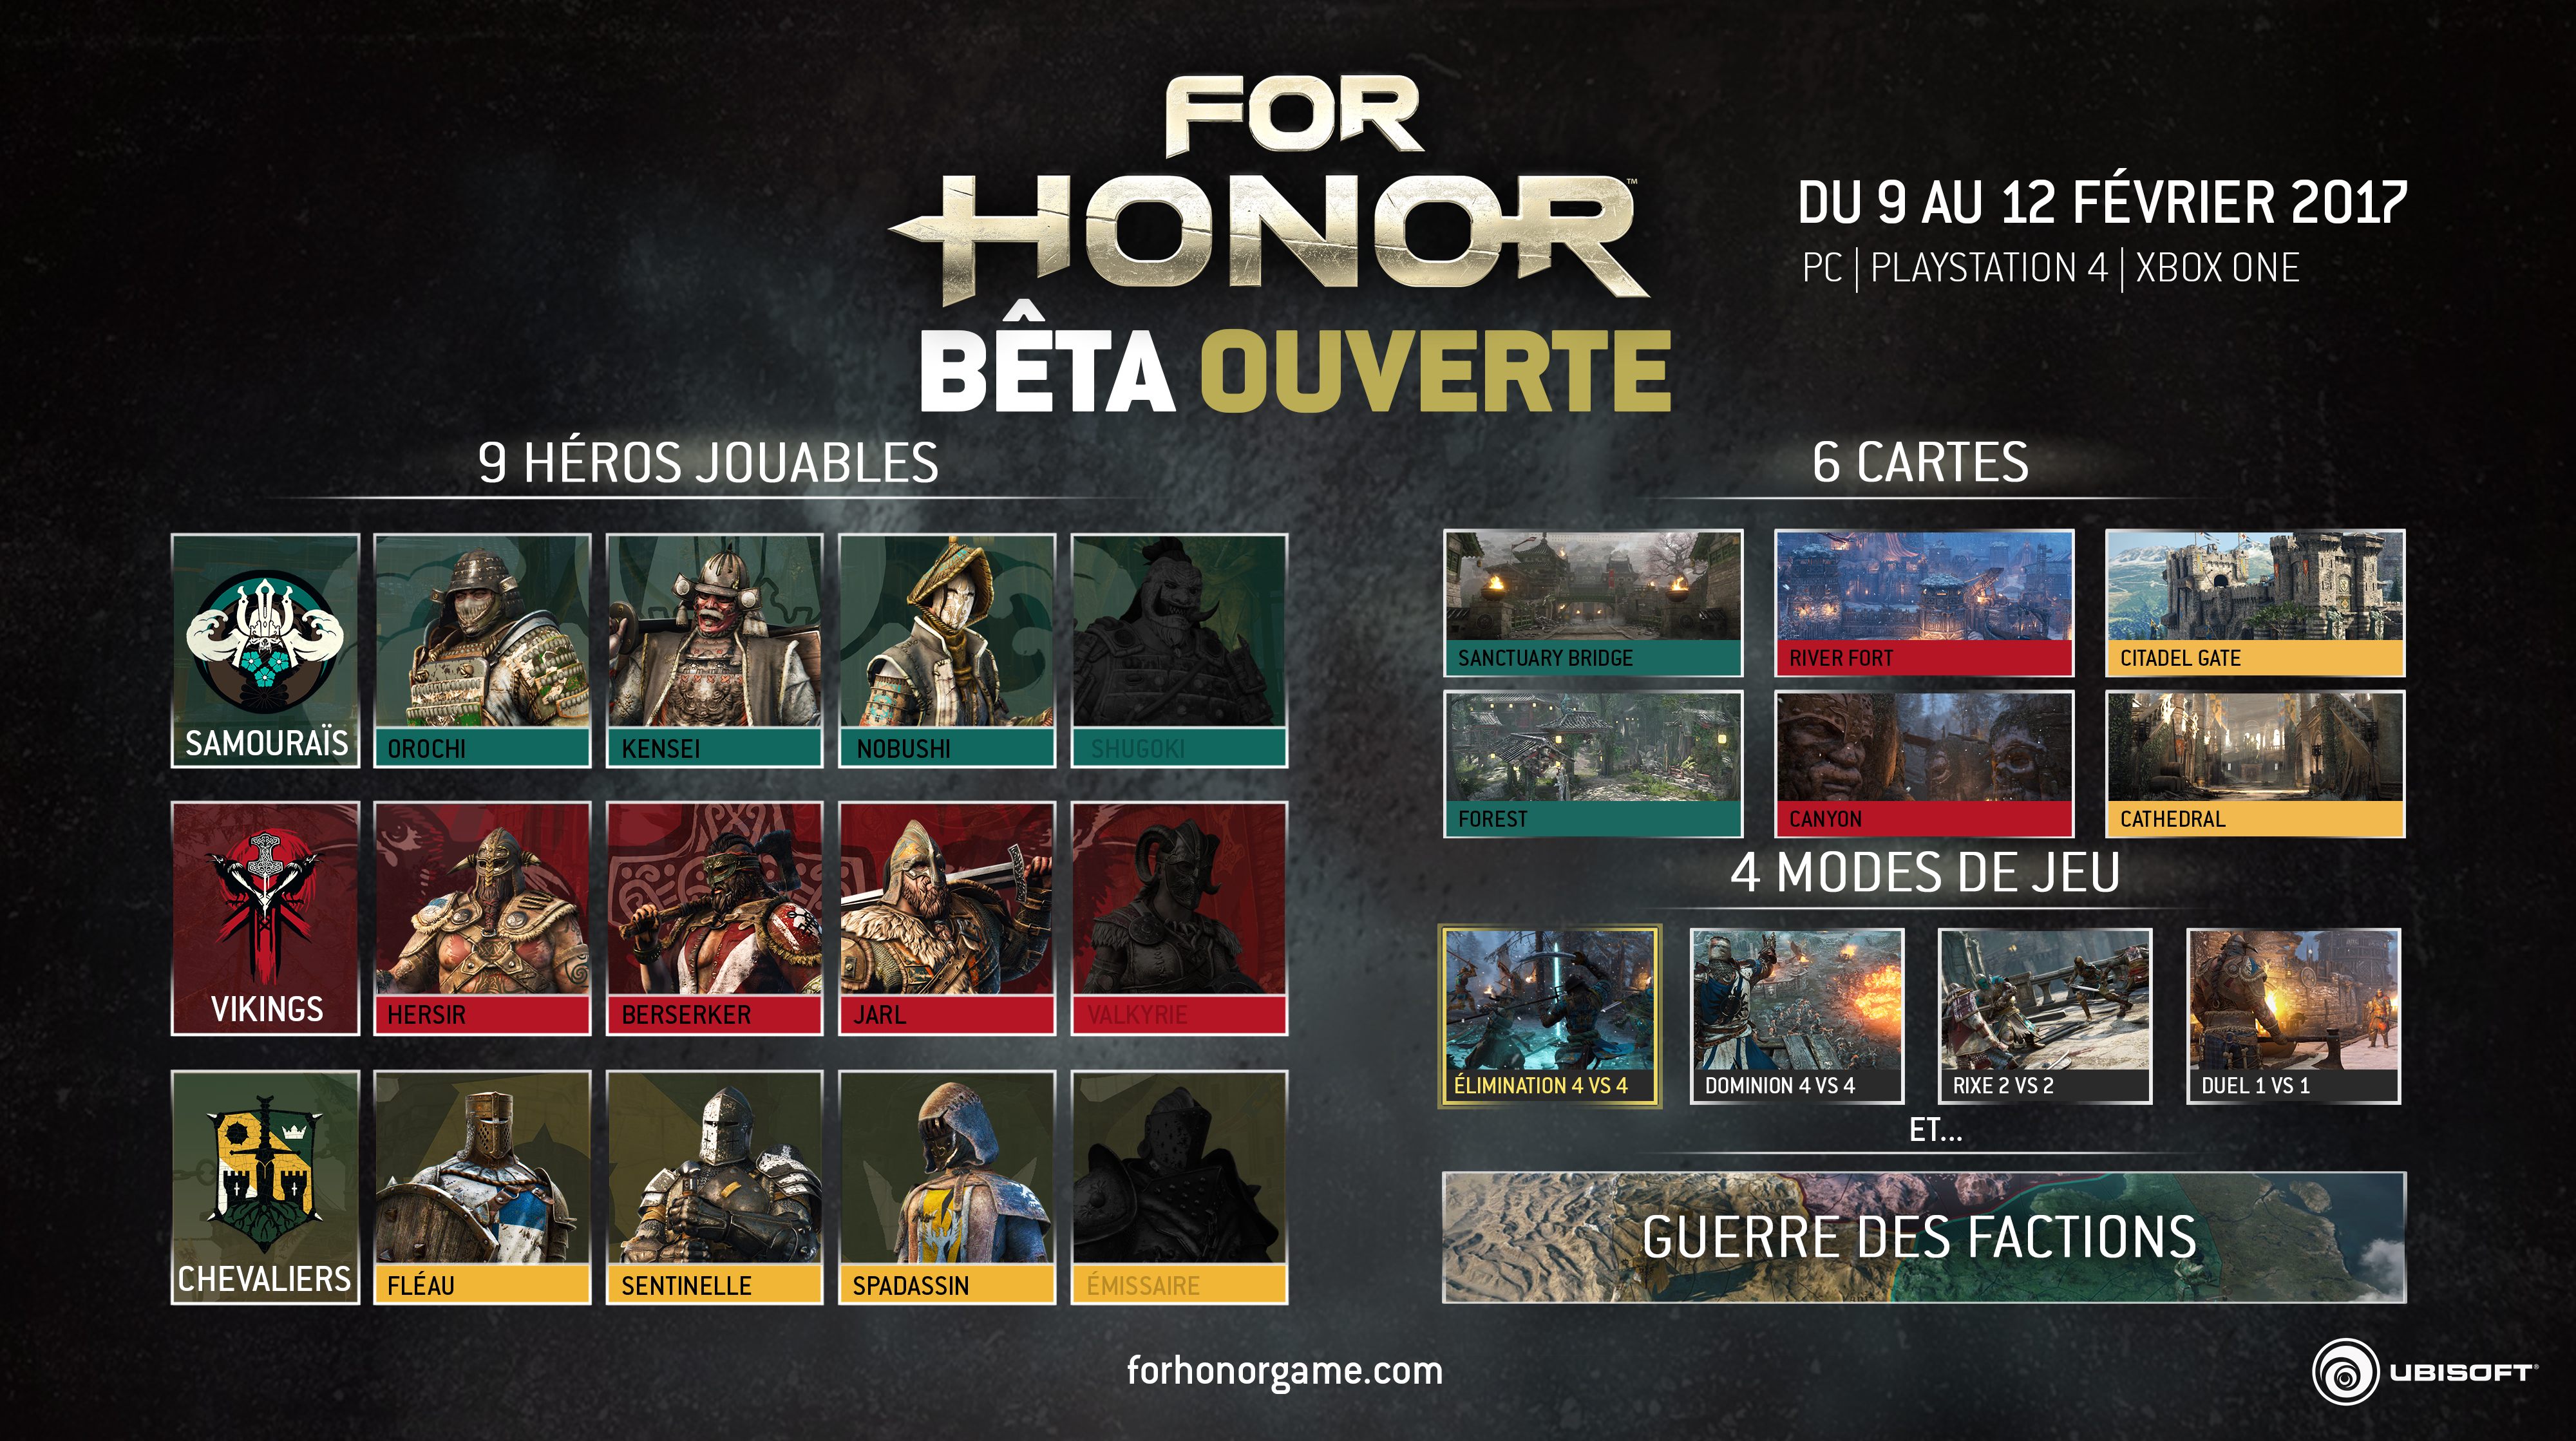 Forhonorbetaouverte